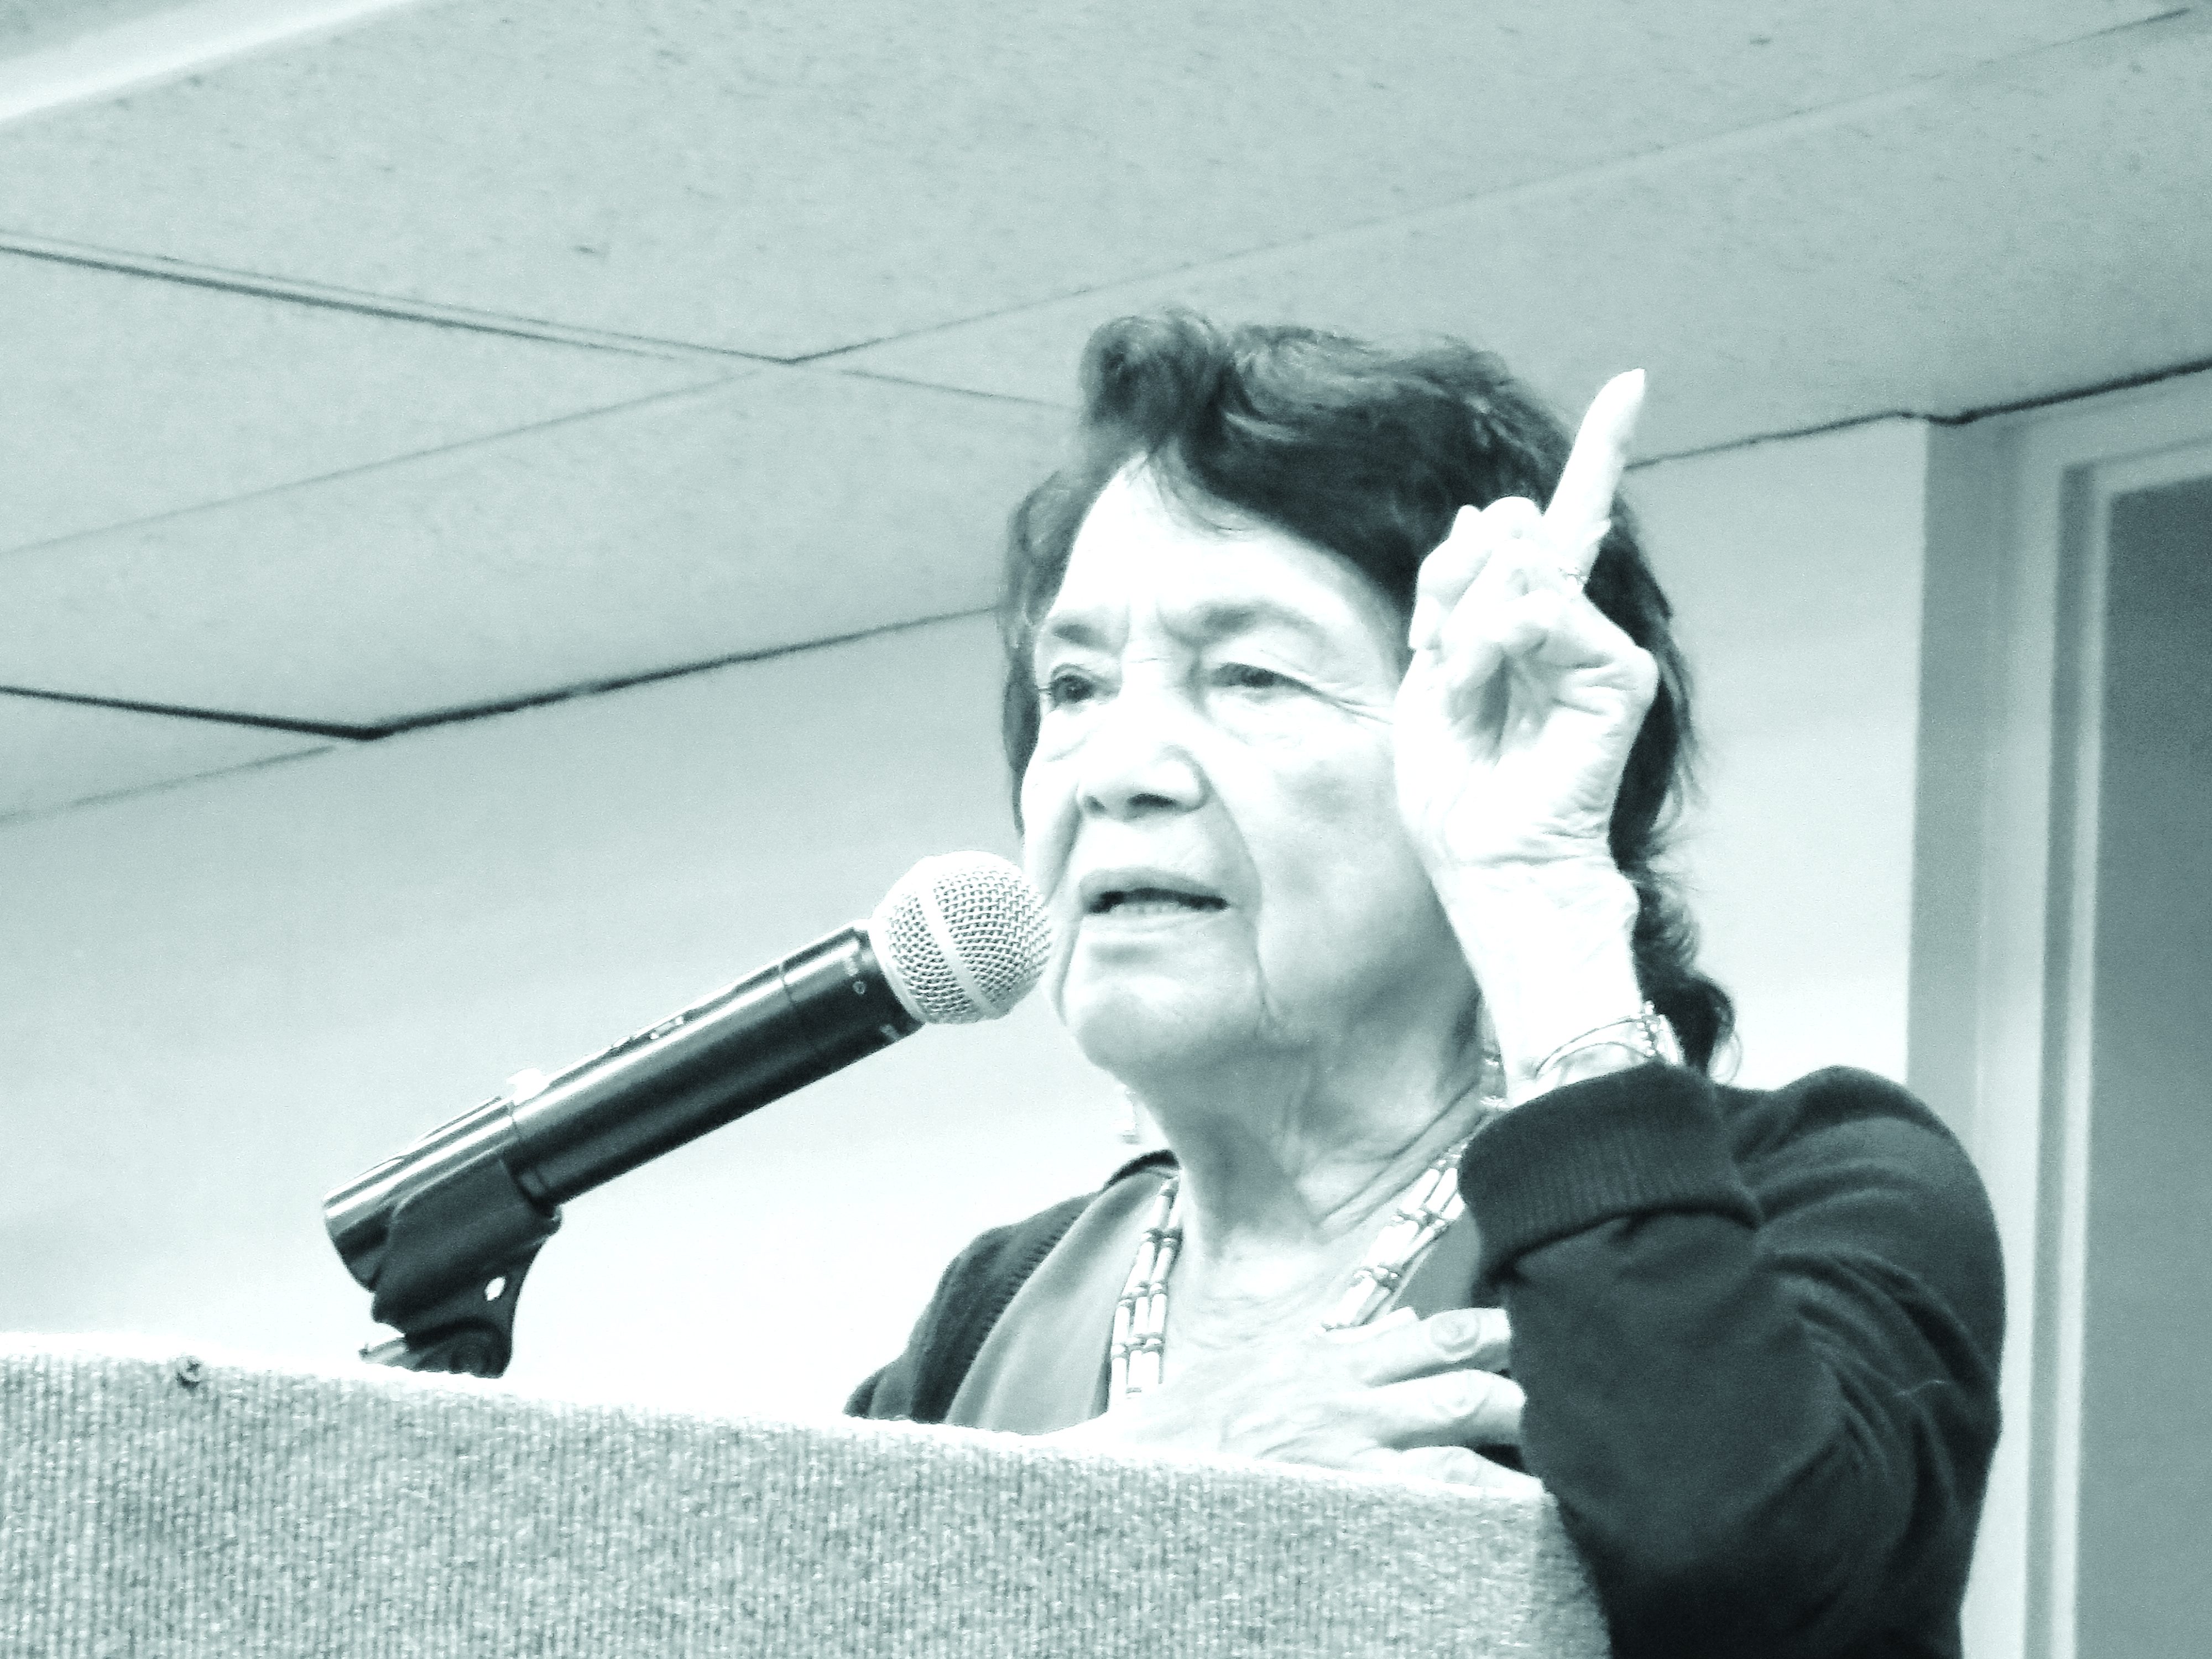 Sí se puede: Iconic activist reaches out regarding equality